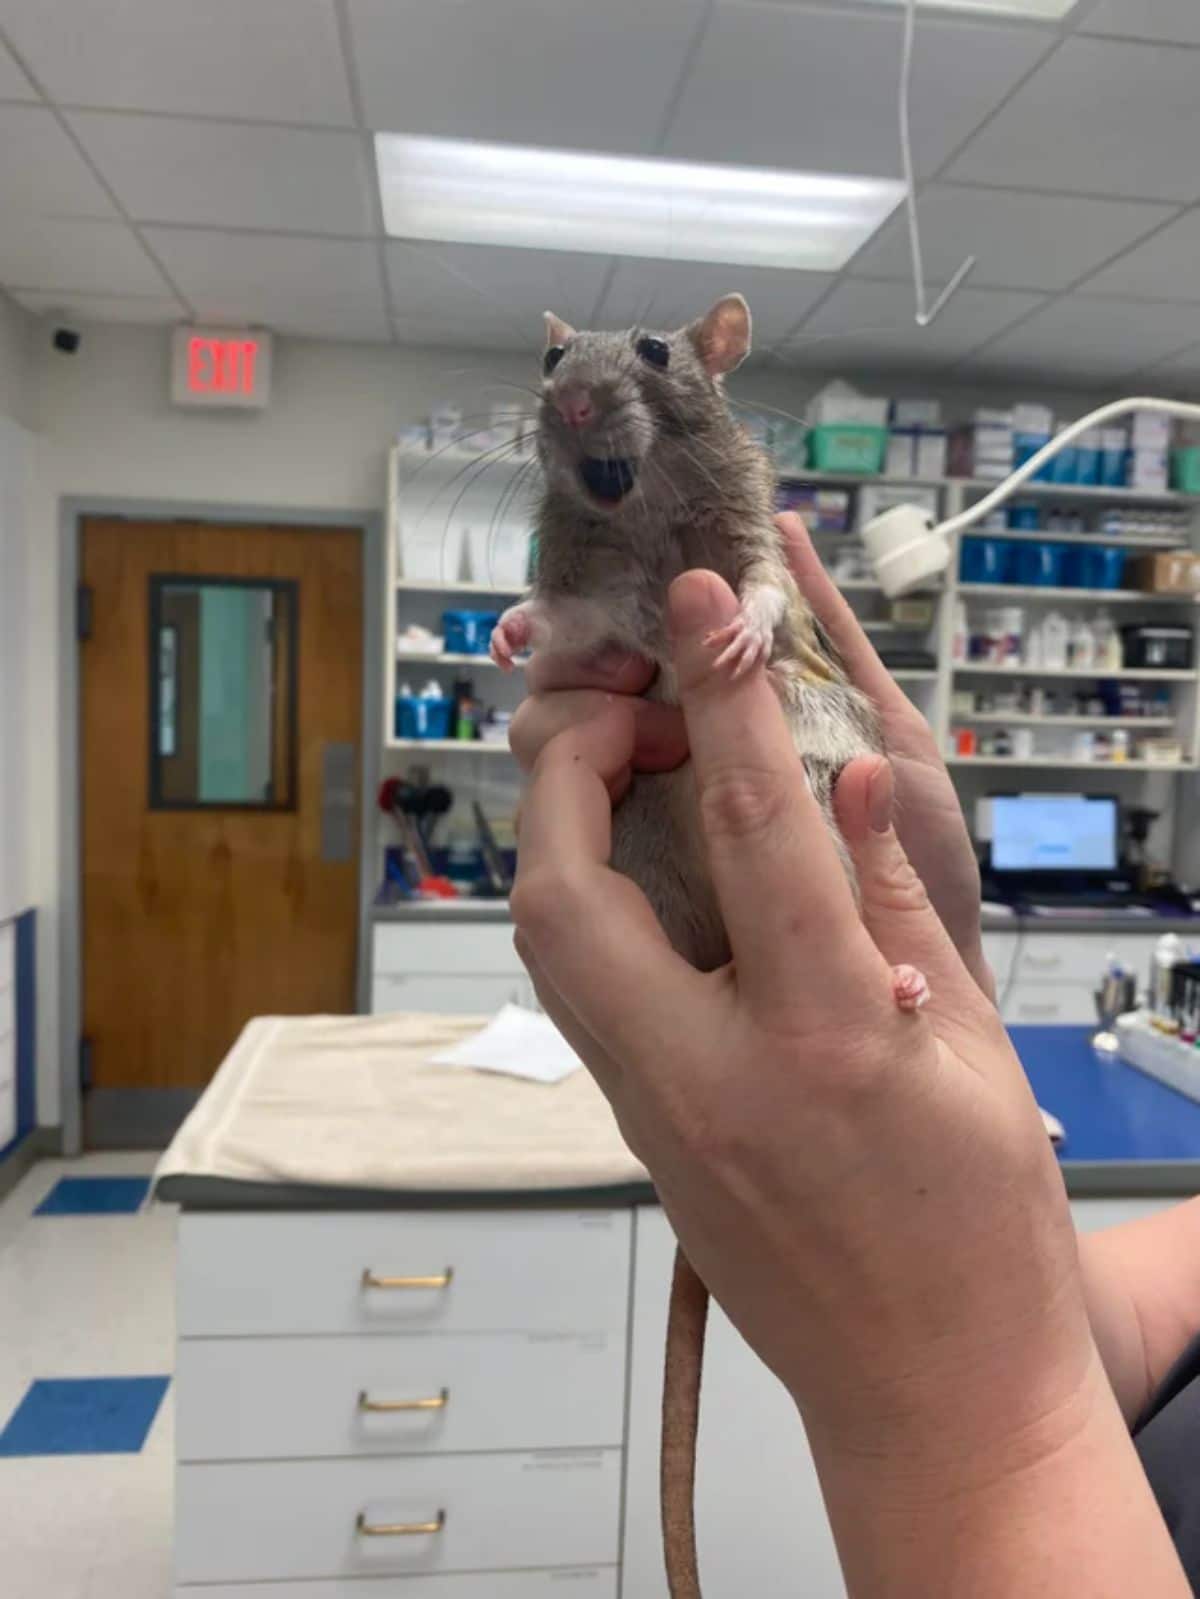 grey and white rat with mouth open being held up by someone